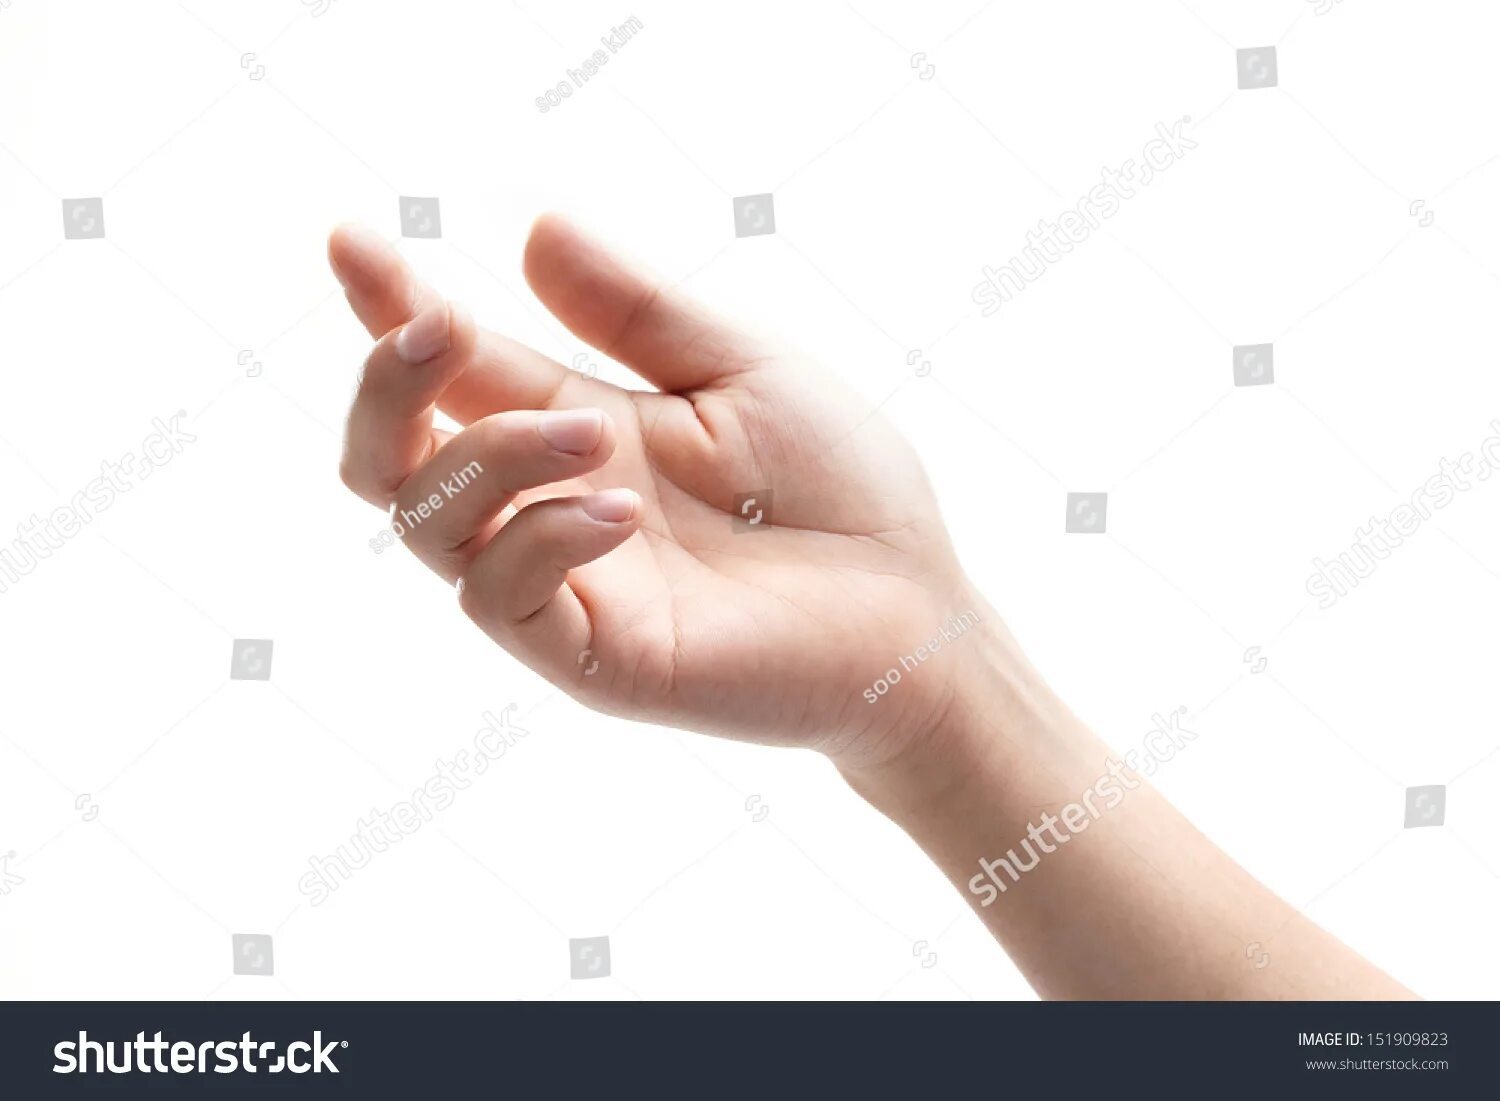 One that hand. Руки для коллажа. Empty hand. Holding something in hand. Hand catching something.